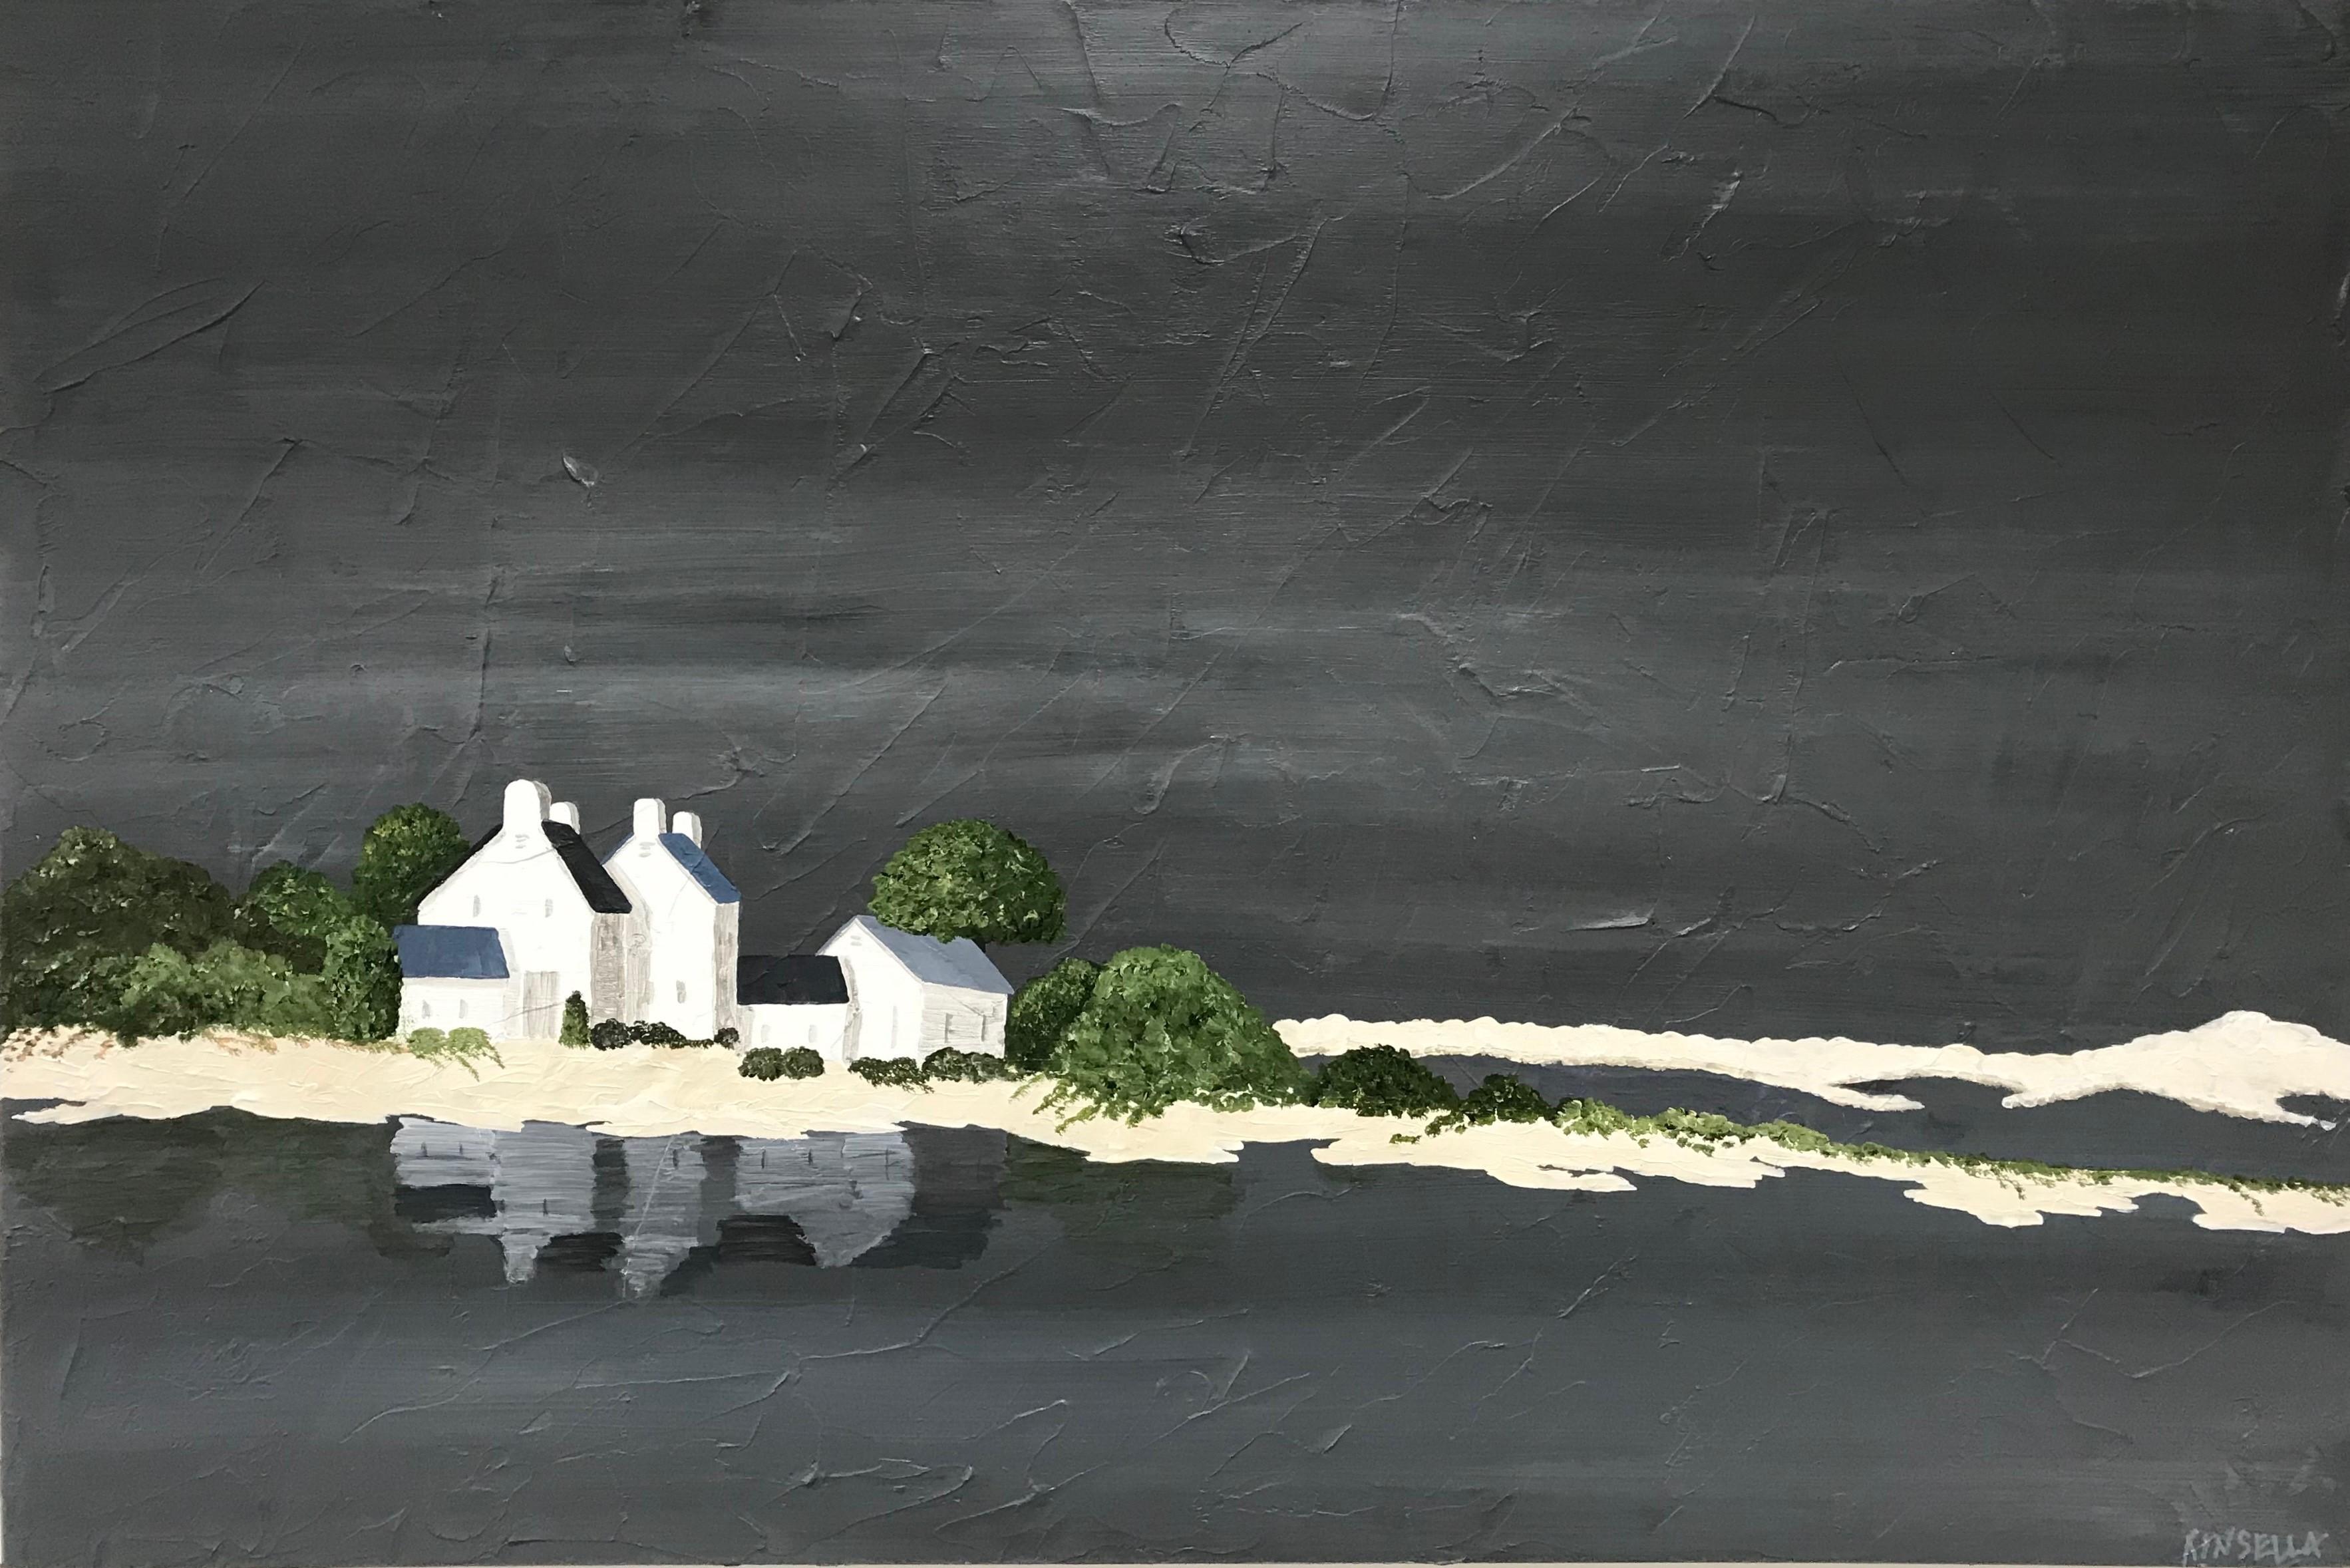 'Quietly Reflecting' is a medium size horizontal seascape painting created by American artist Susan Kinsella in 2018. Featuring a dark grey, beige and dark green palette, the painting plays beautifully with contrasts. The strong light, cast on the